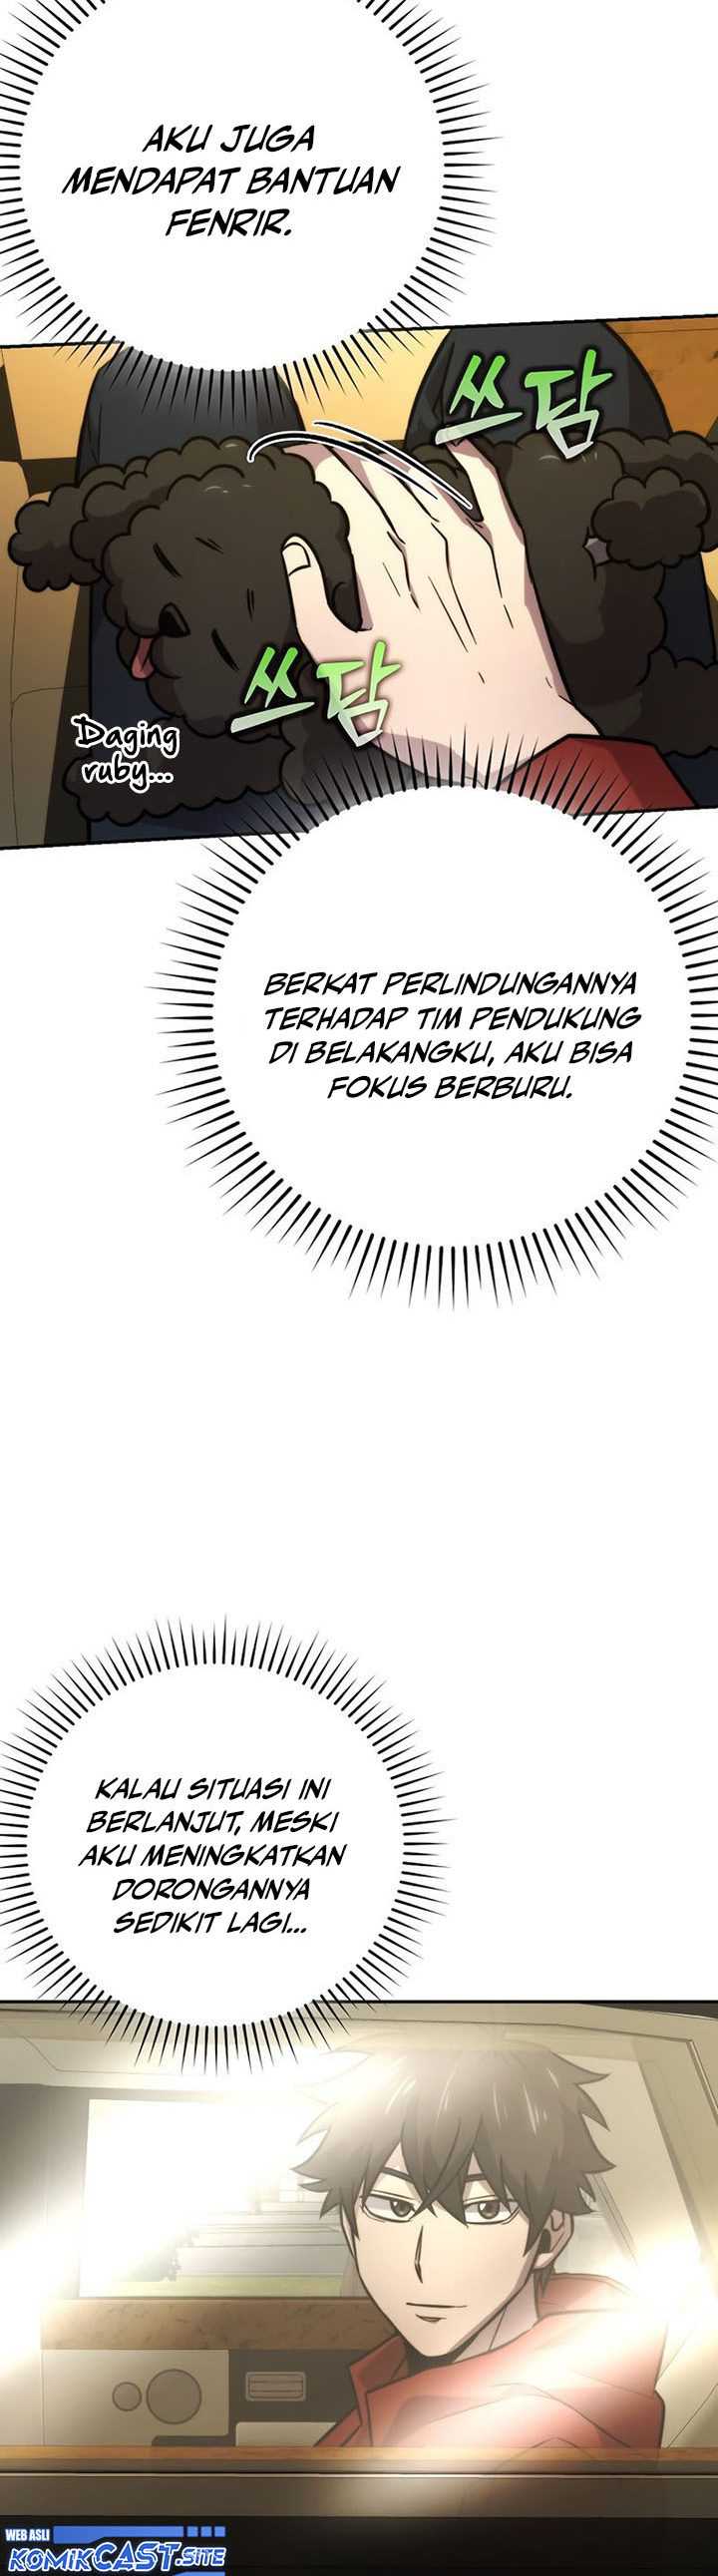 Demon Lord’s Martial Arts Ascension Chapter 41 fix